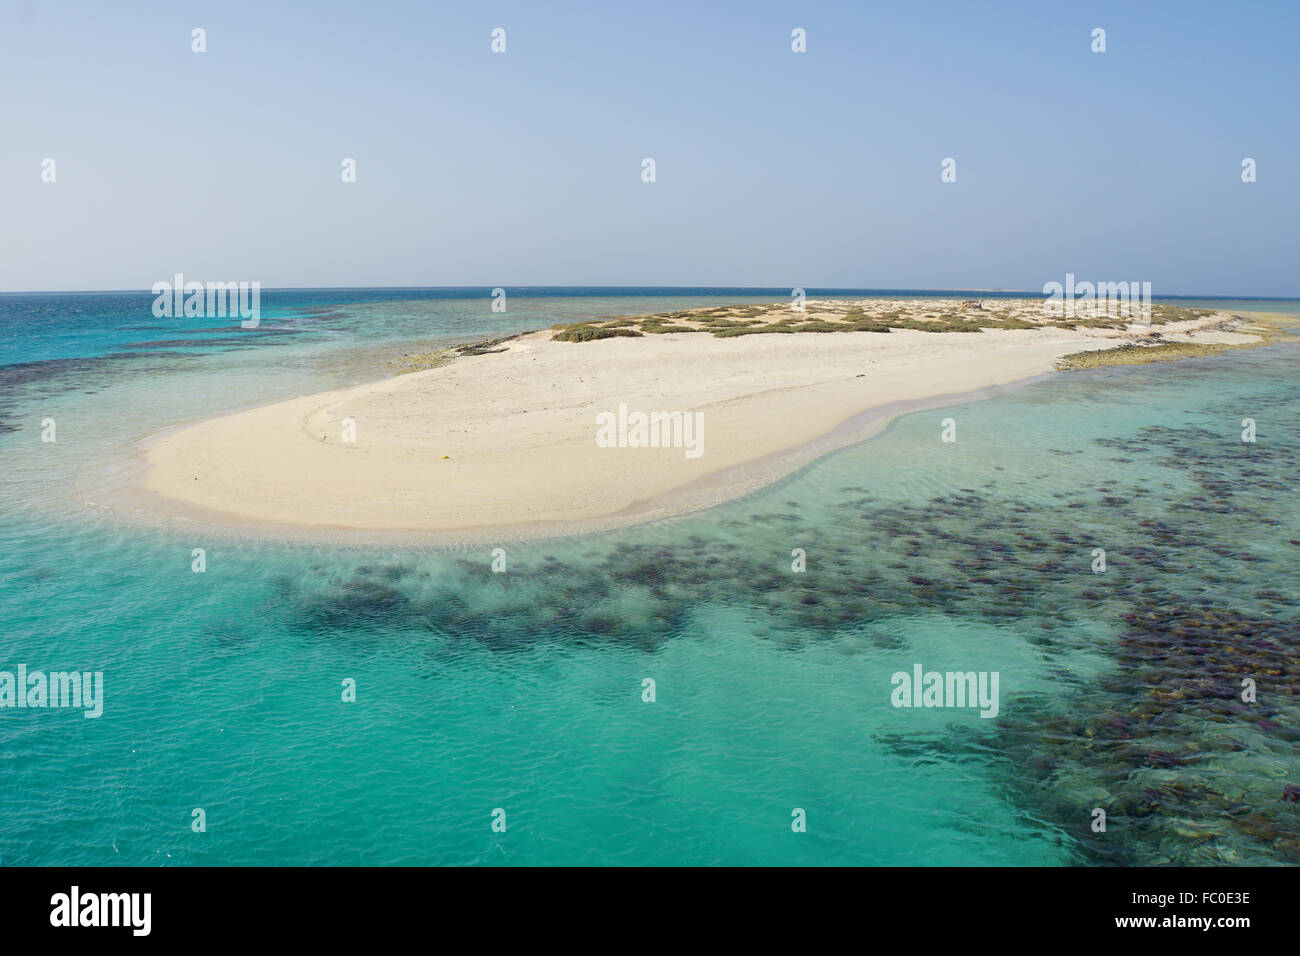 lovely atoll qulaan islands in the red sea Stock Photo